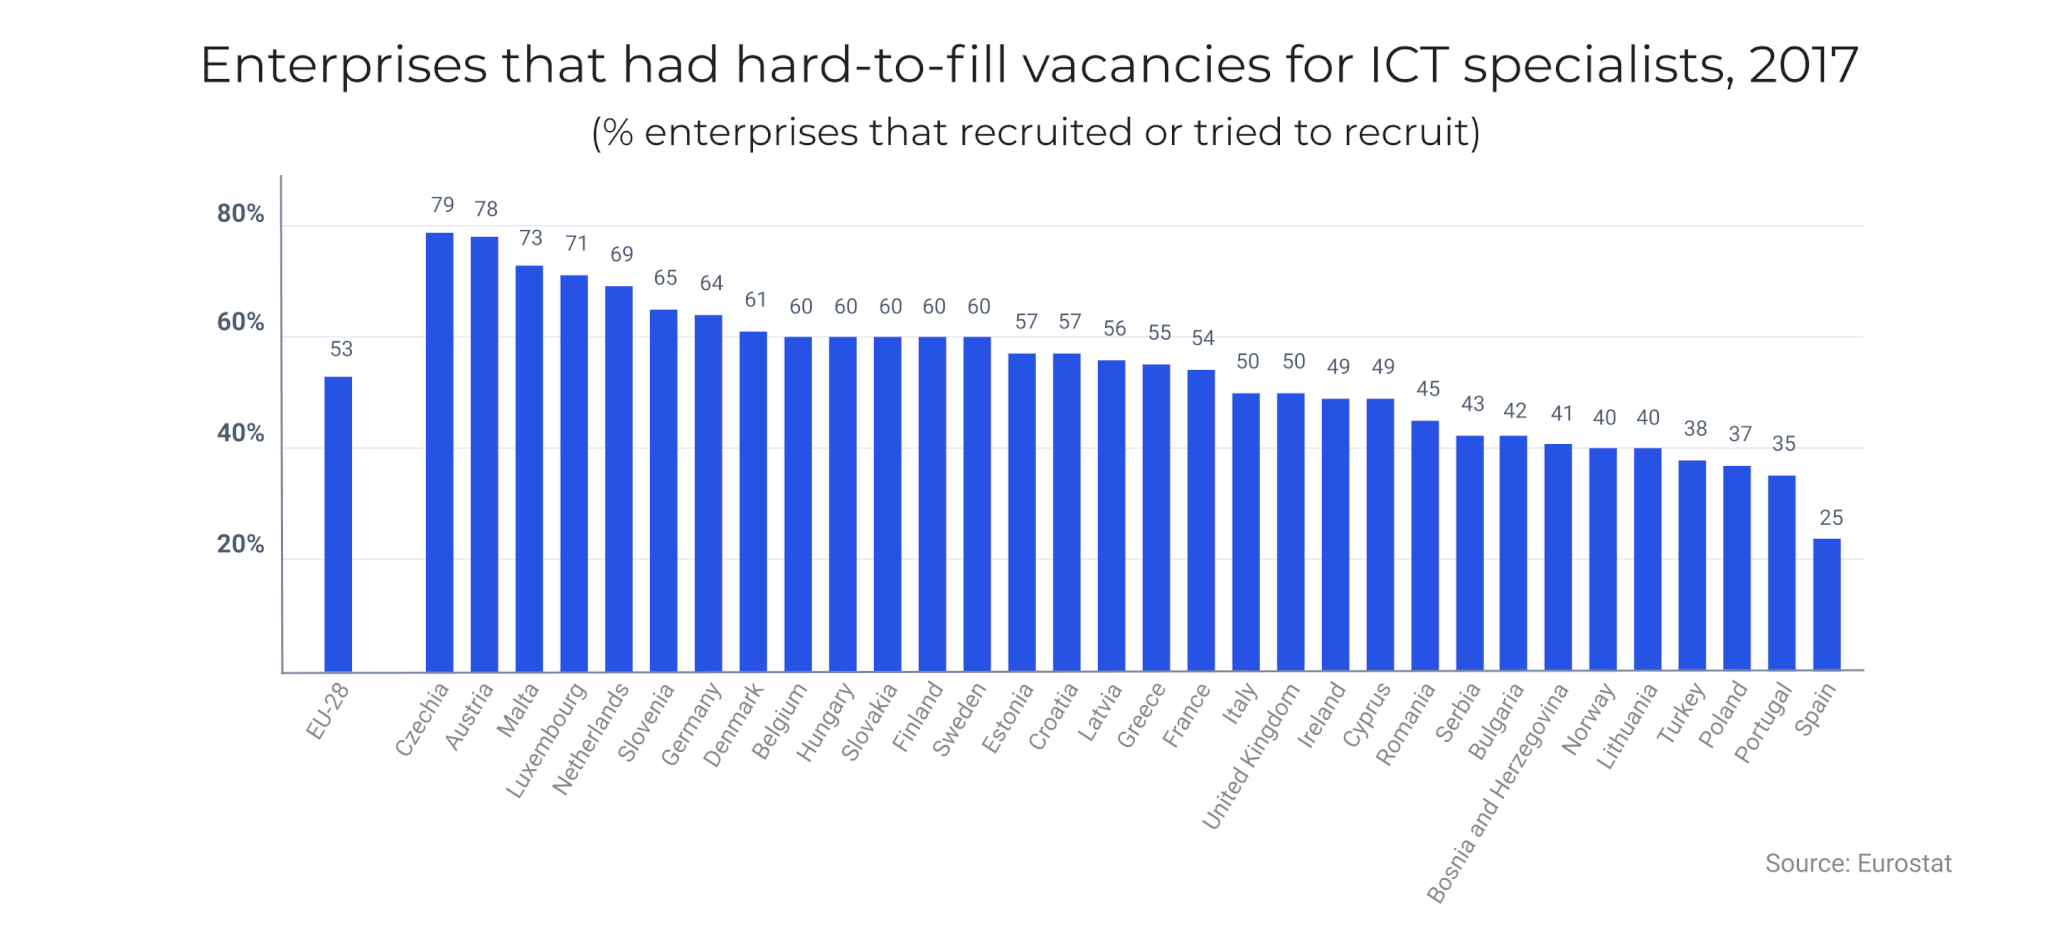 Enterprises that had hard-to-fill vacancies for ICT specialists, 2017